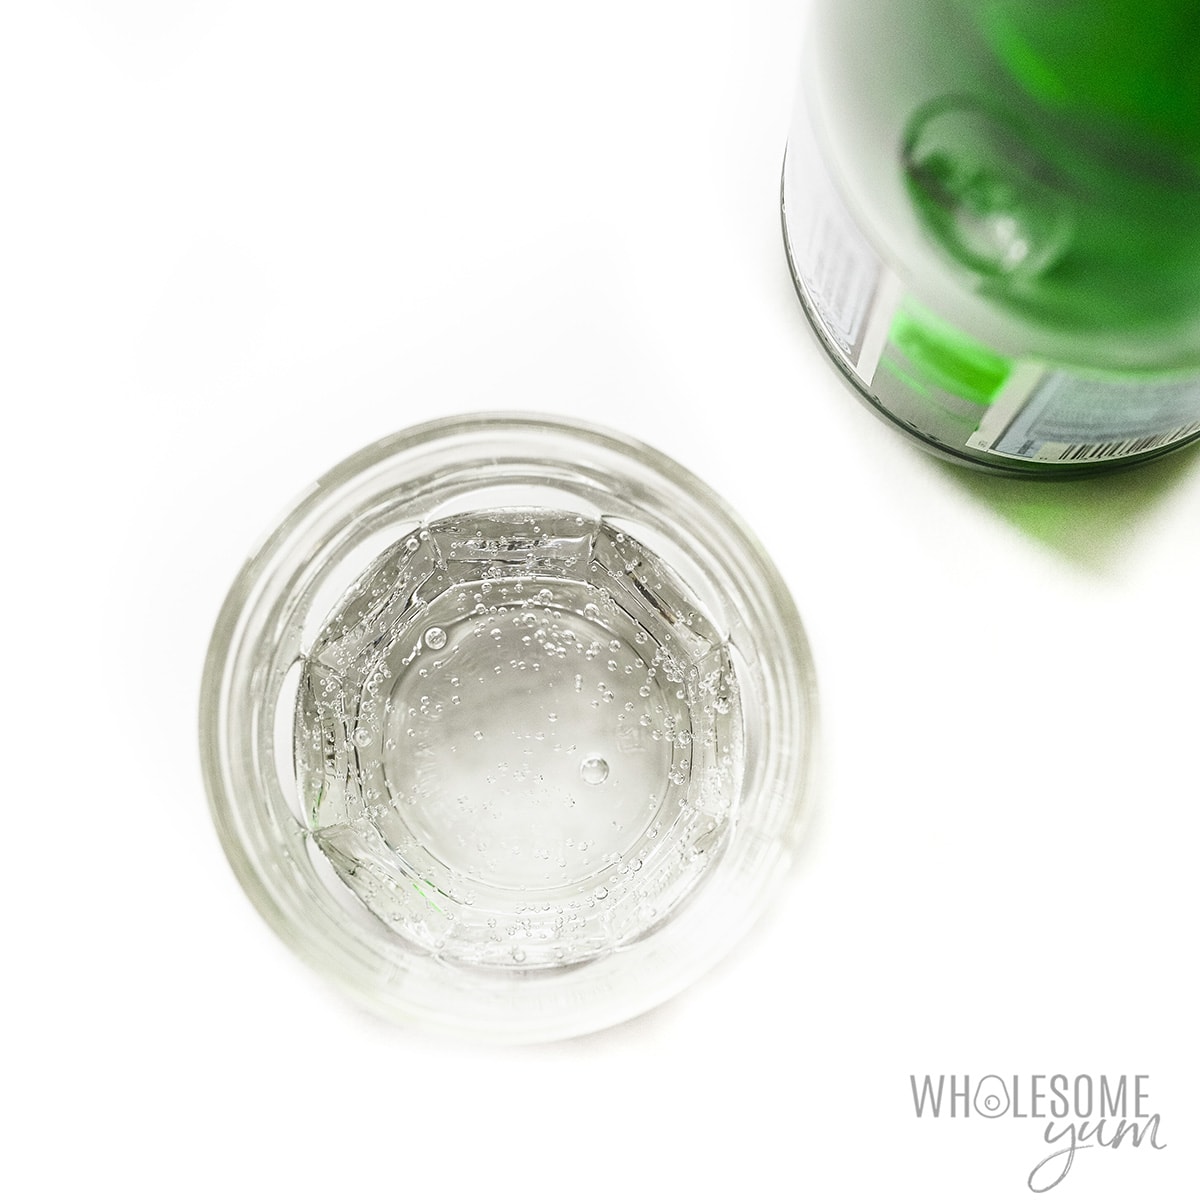 Carbonated water in a glass.